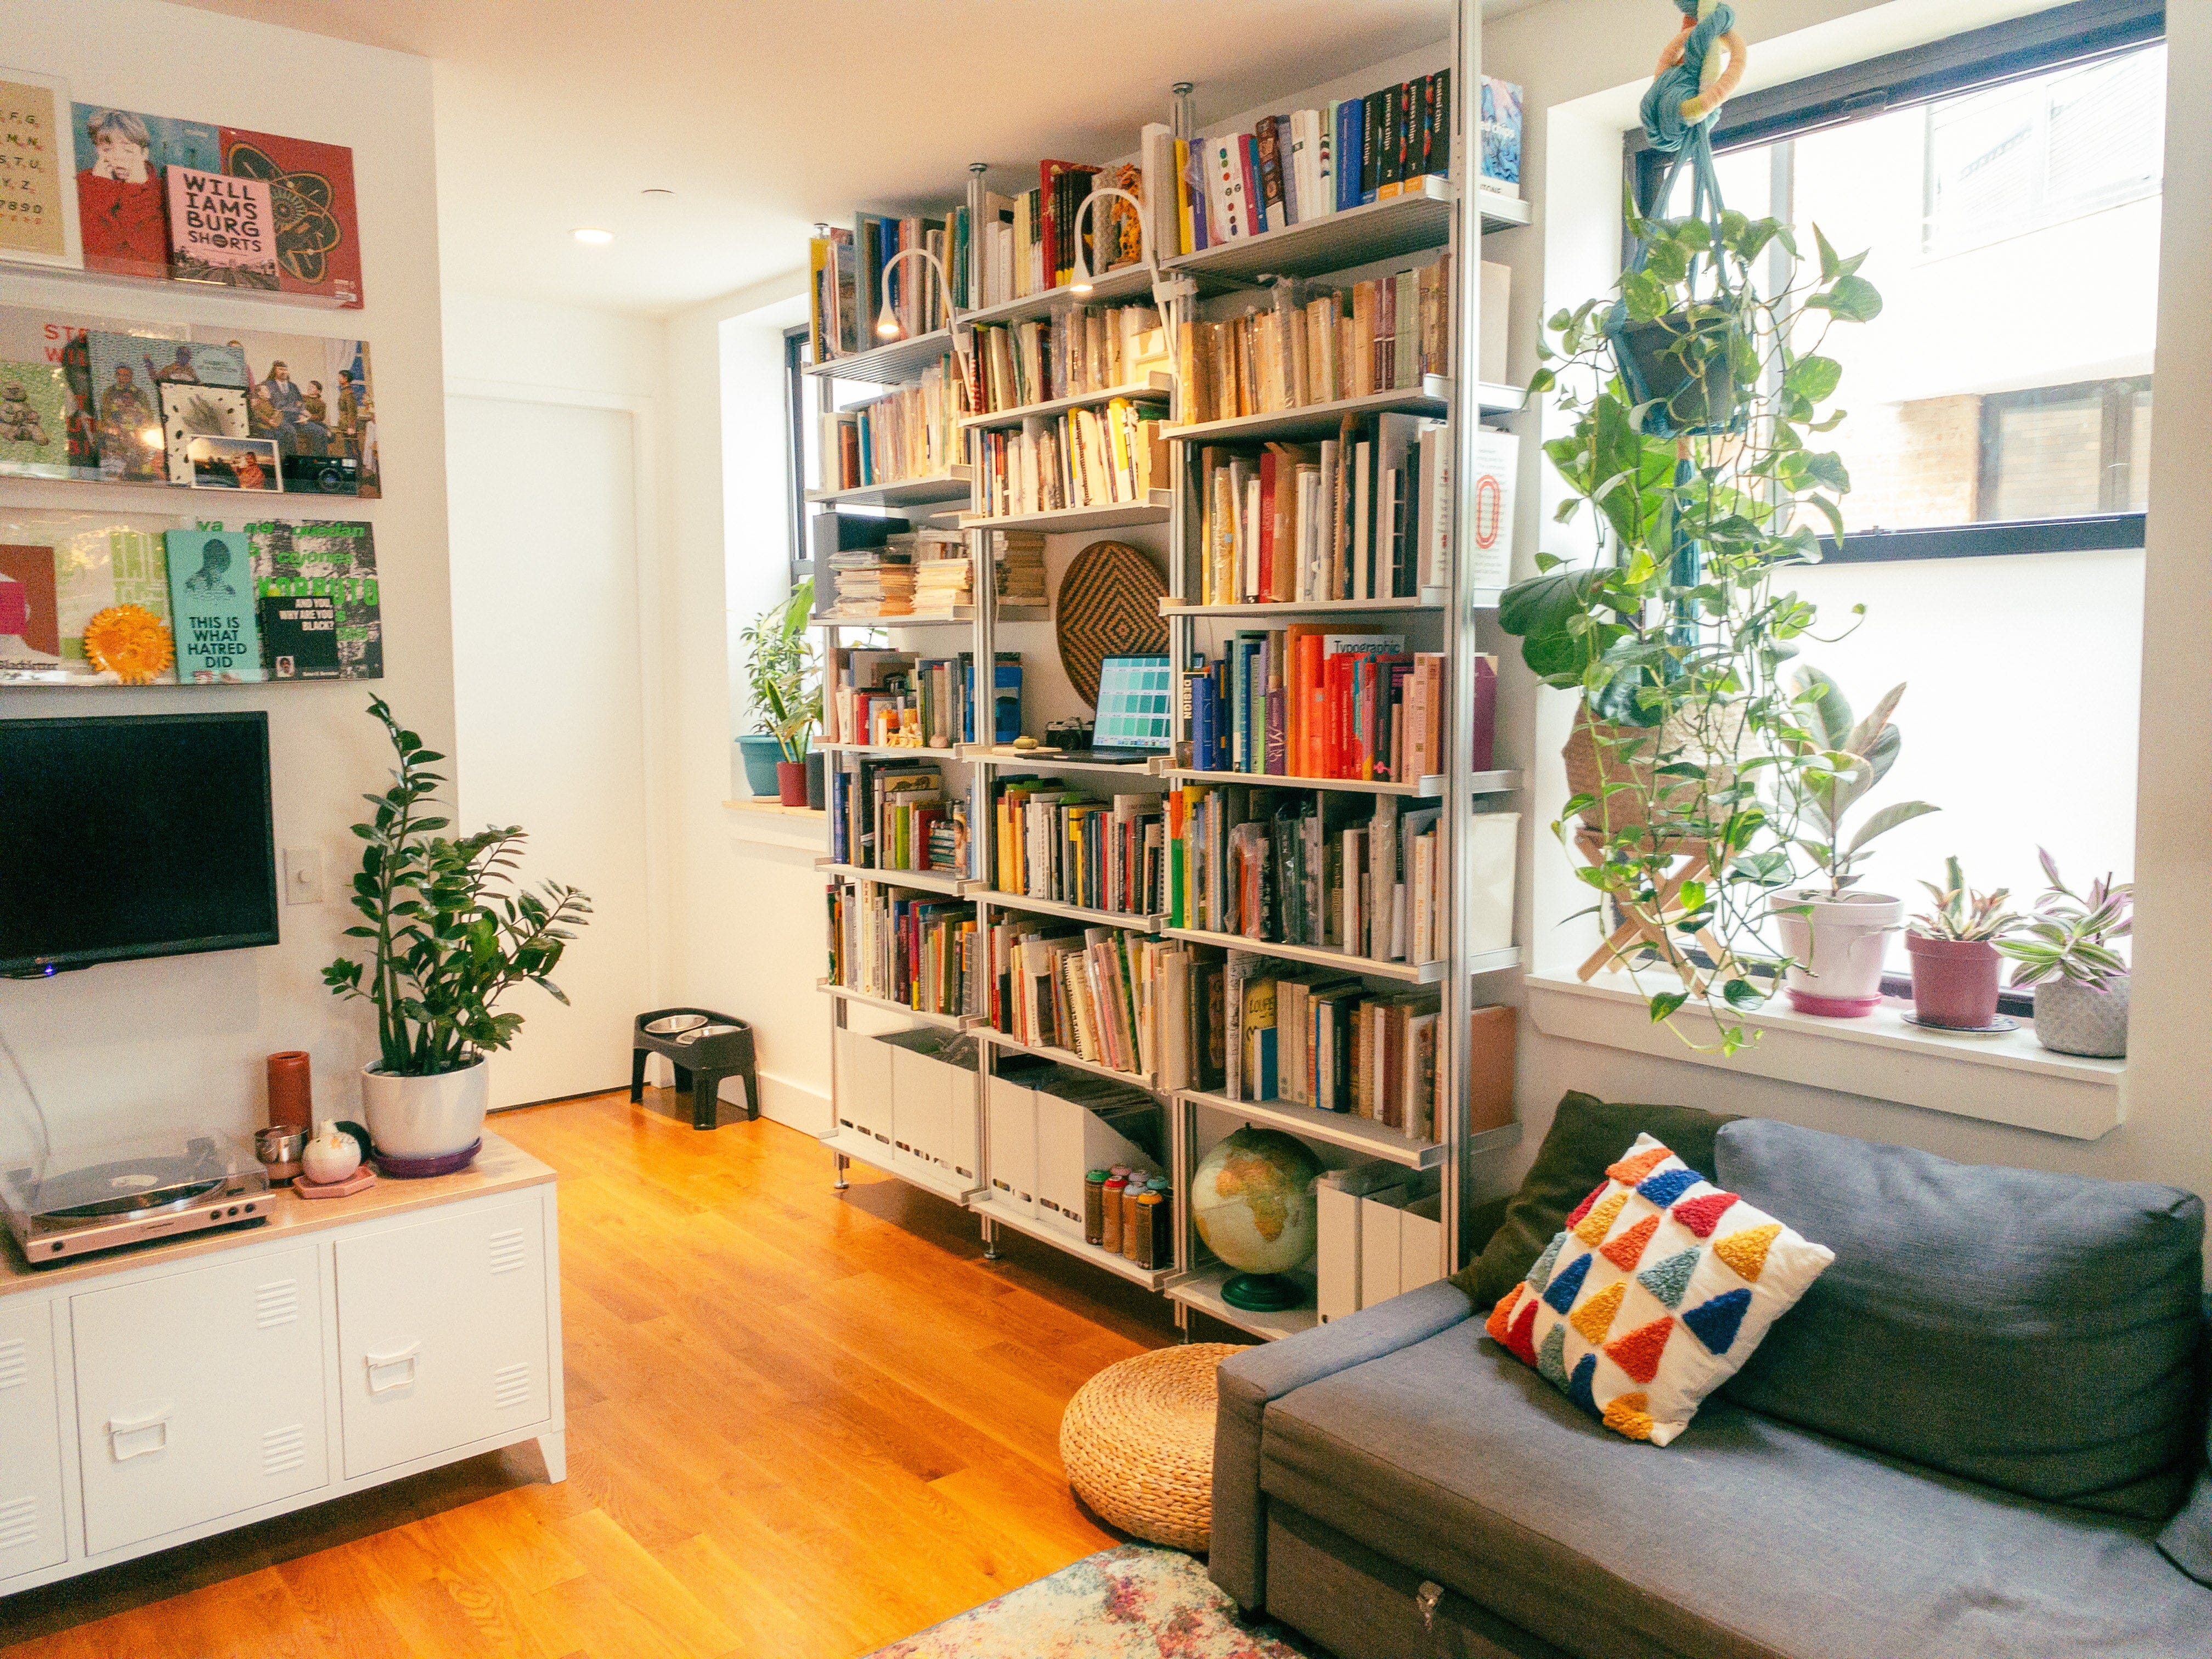 New York Book Designer Uses Modern Shelving to Organize Her Massive Book Collection